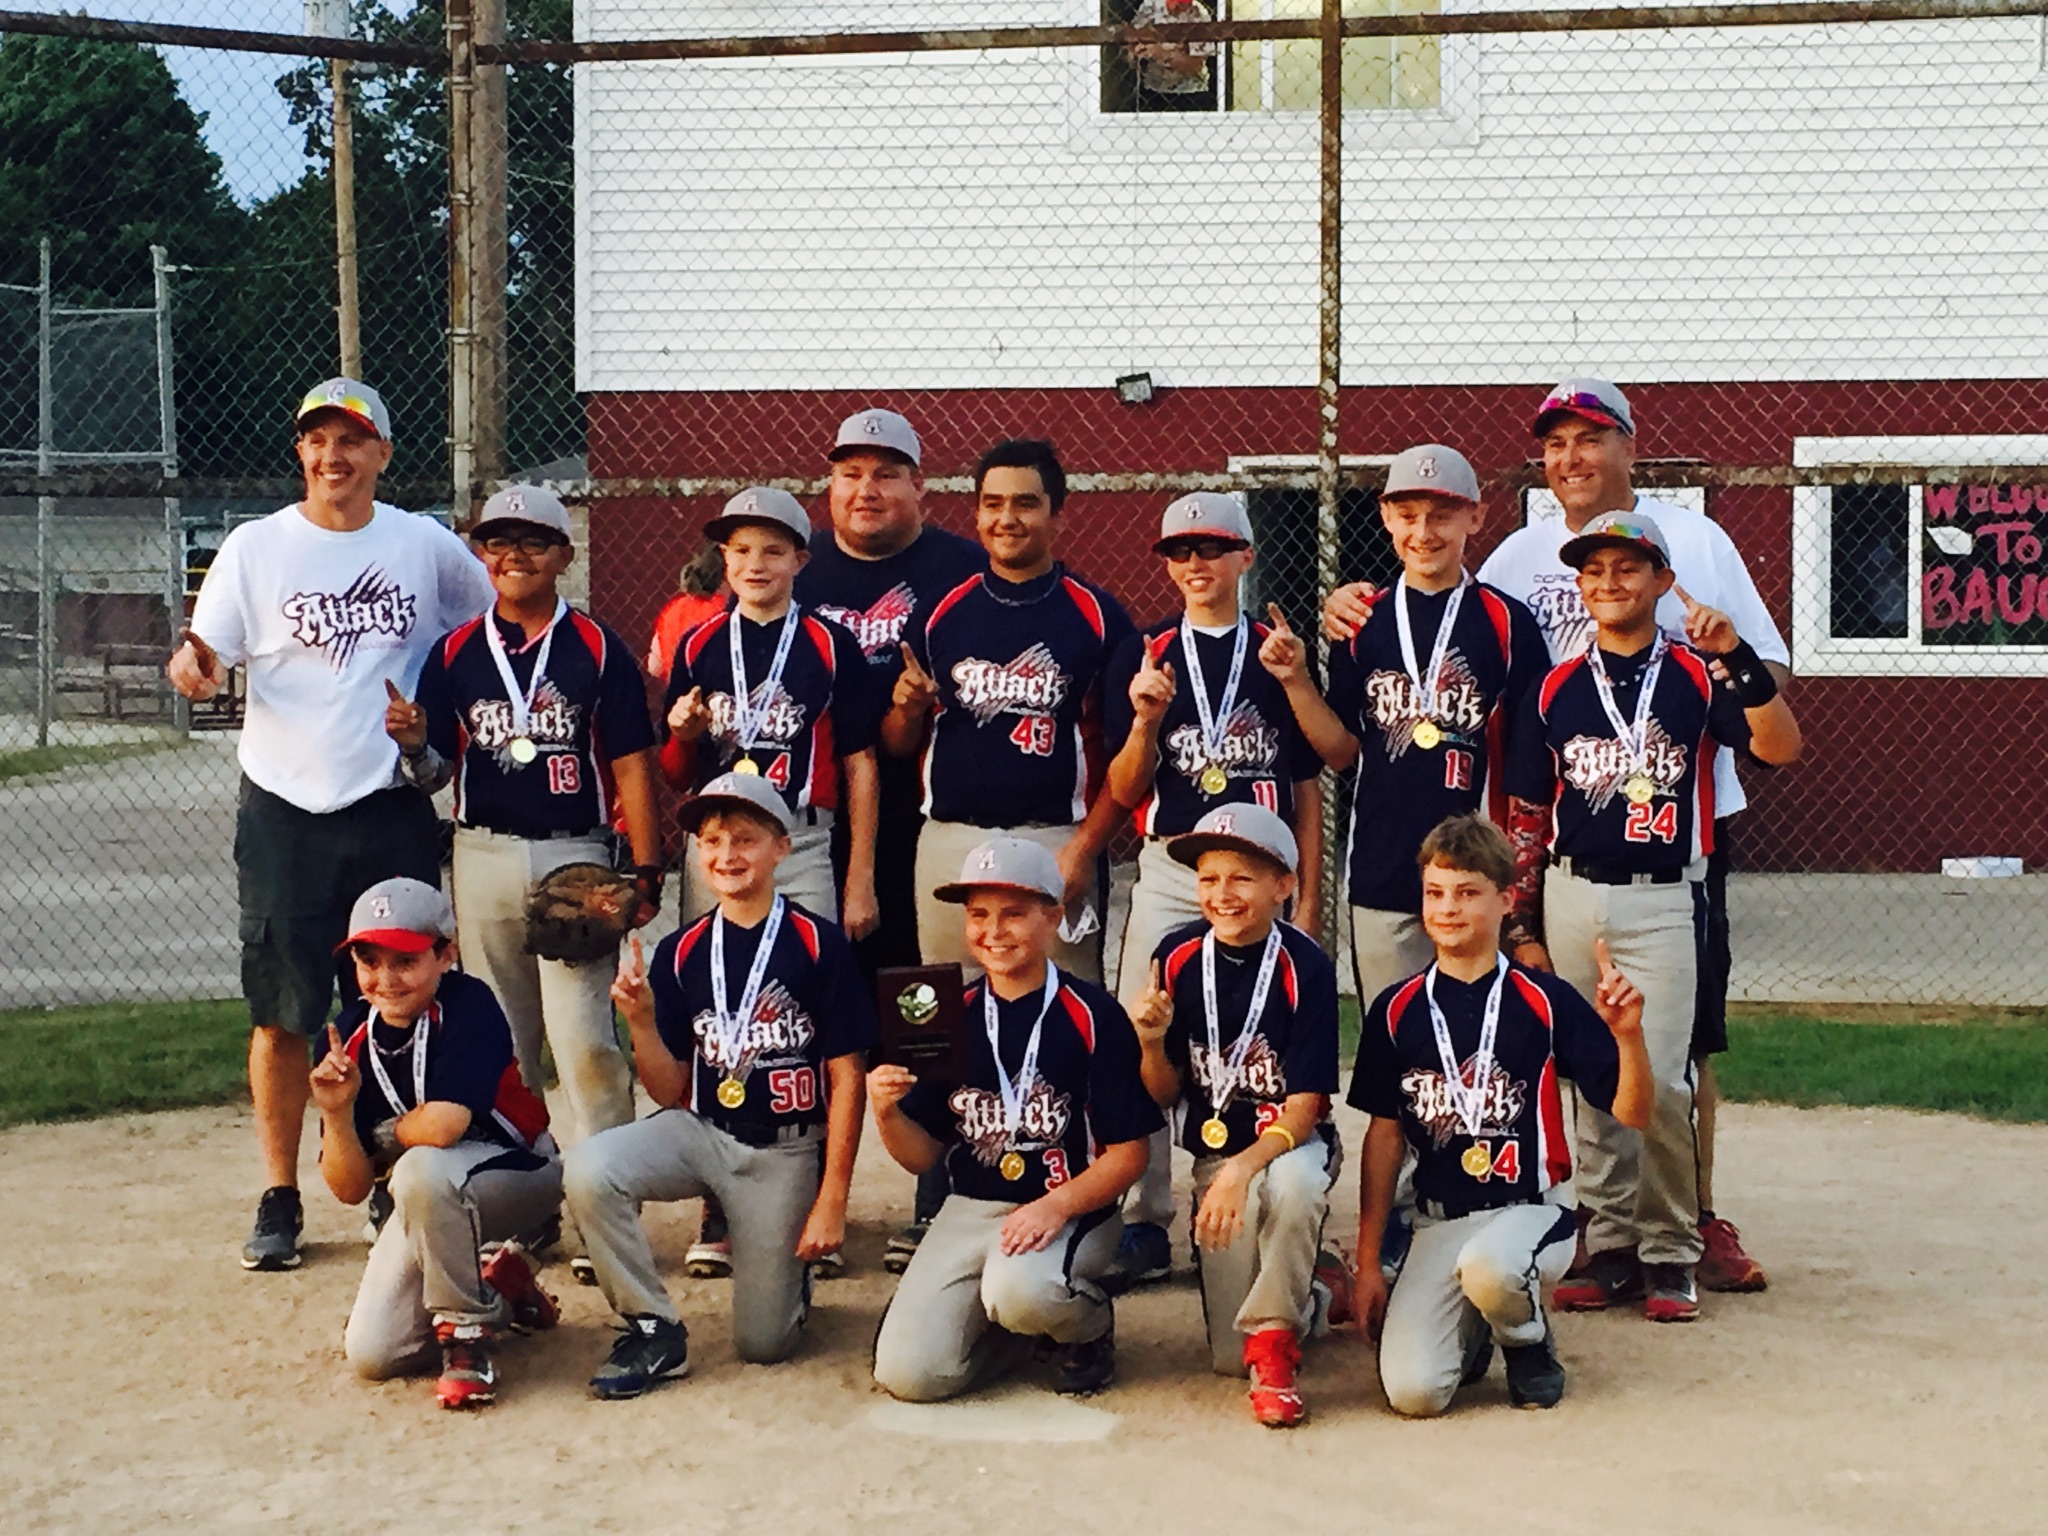 The 12U CCAC Attack won the Northern Indiana Cardinals Tournament championship this weekend. The champions, who went 3-1 to win the tourney title, are shown above (Photo provided by Bill Lechlitner)